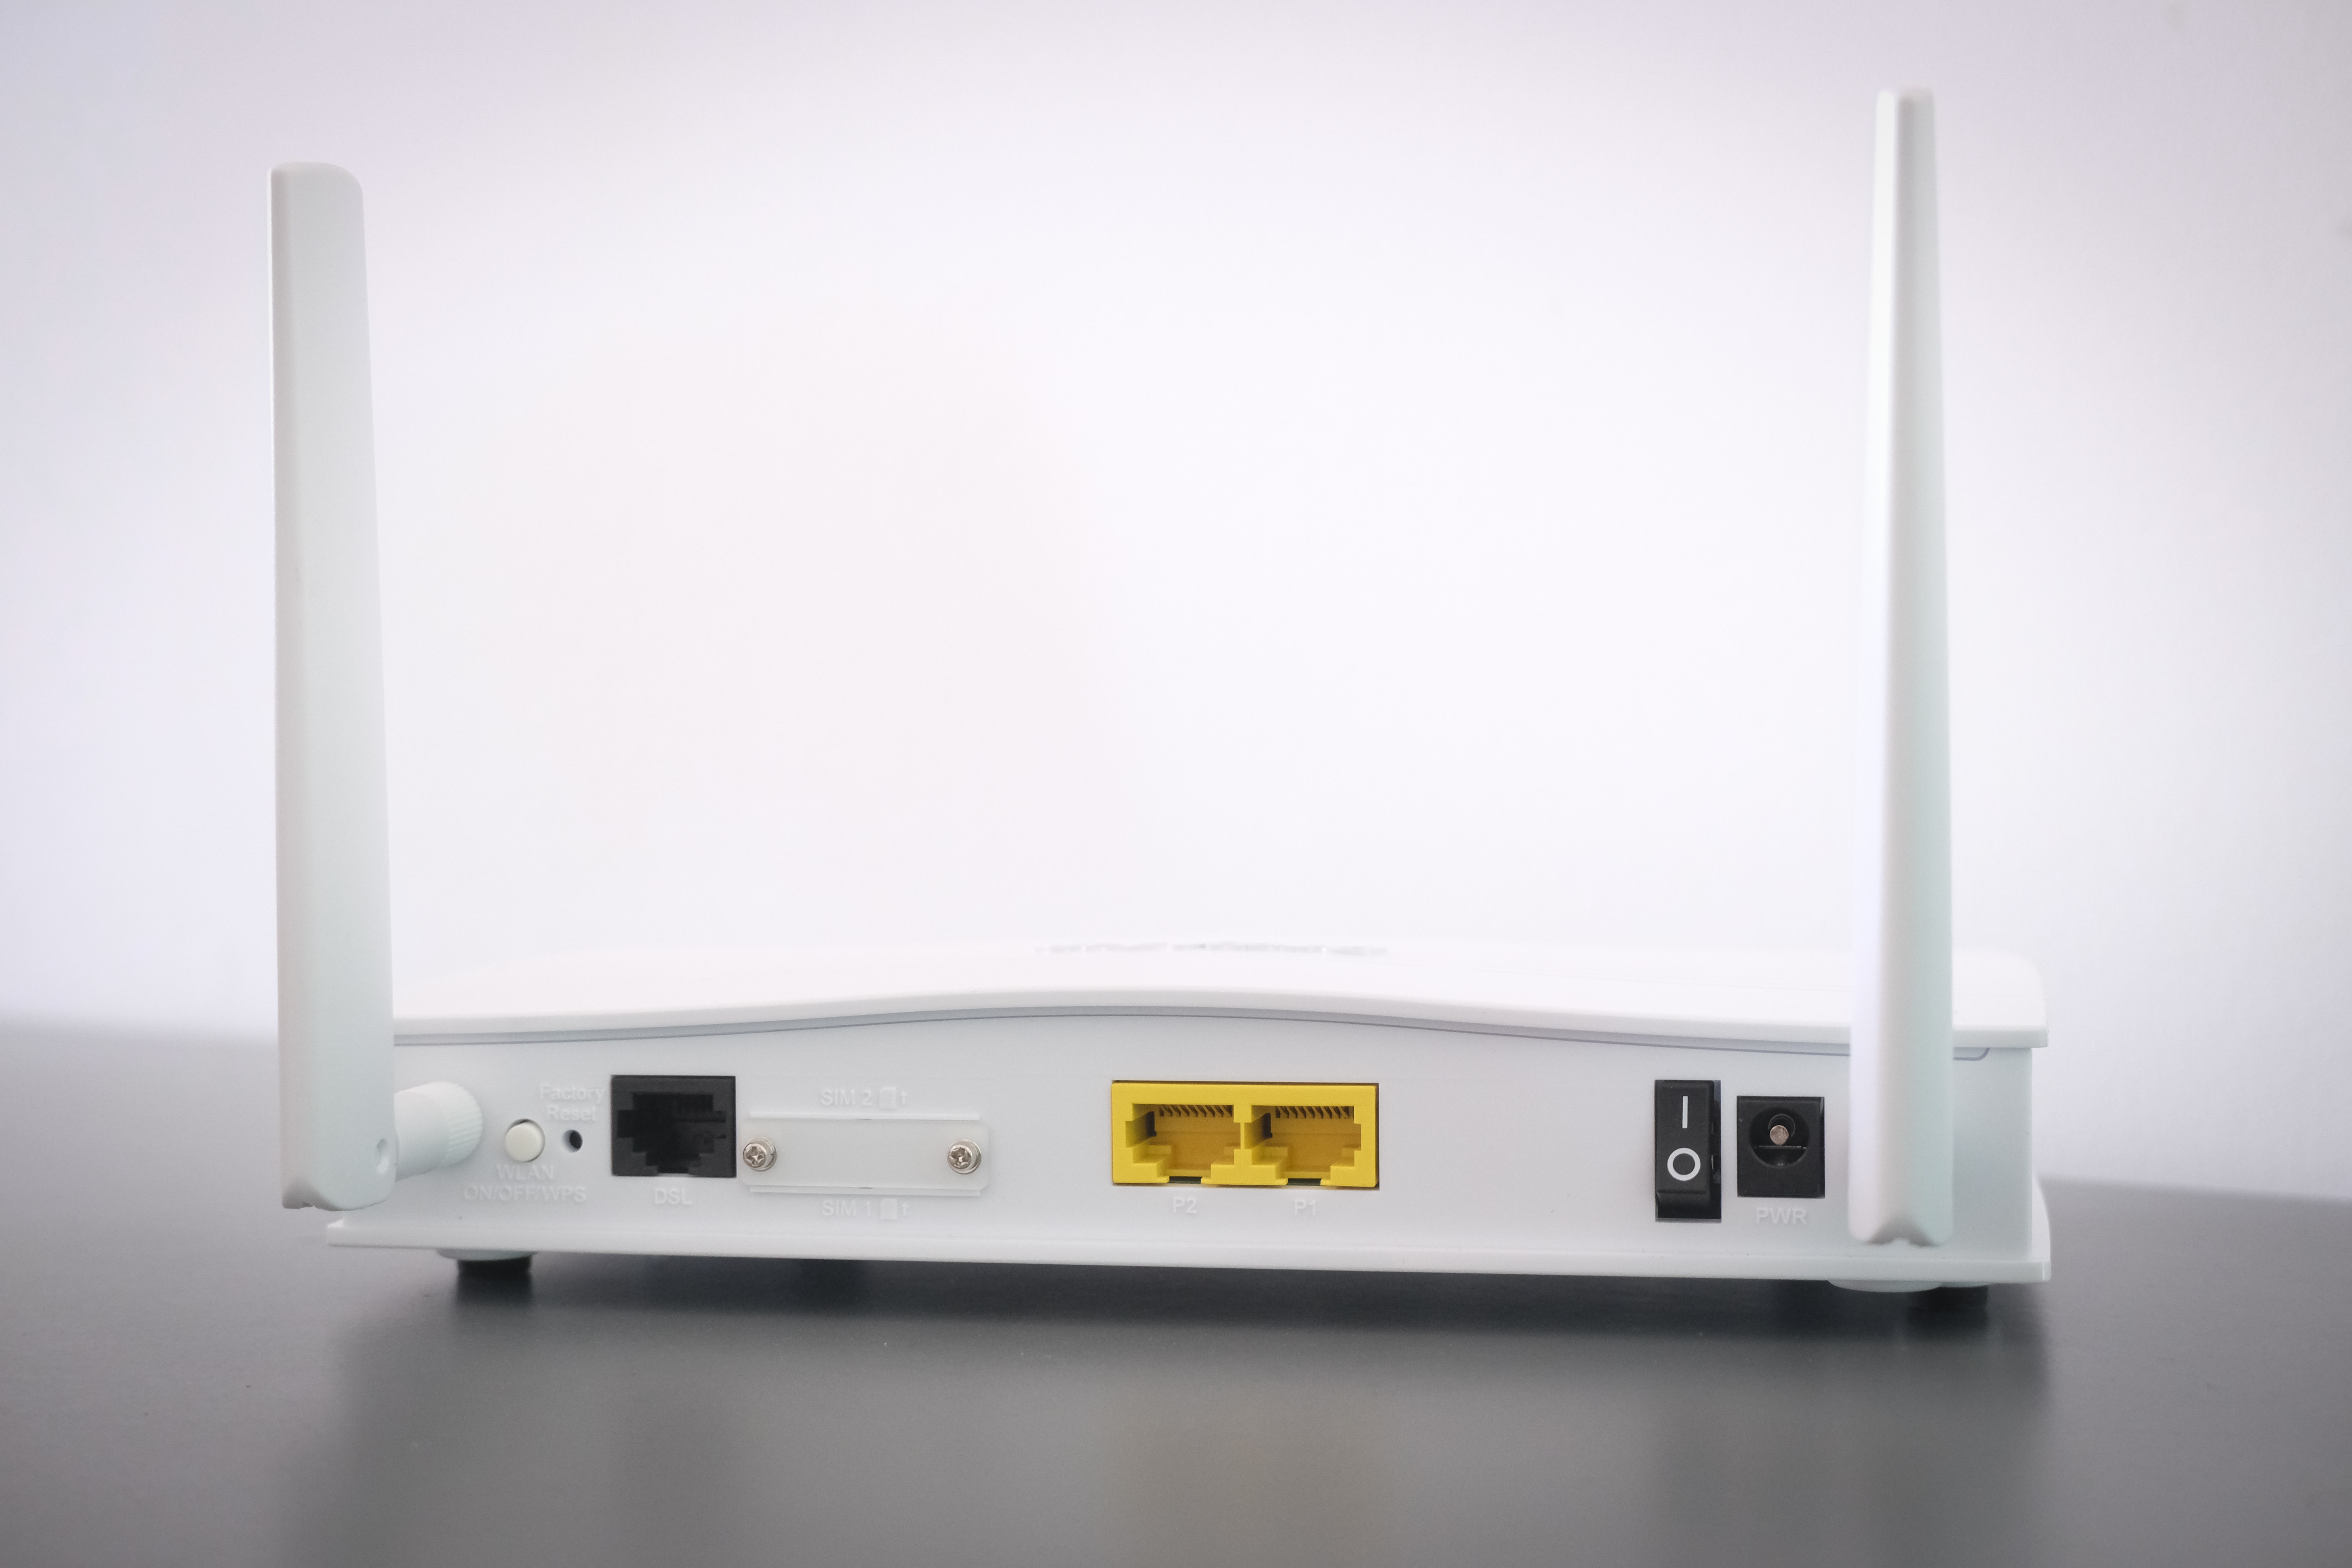 Rear view of a white-colored router